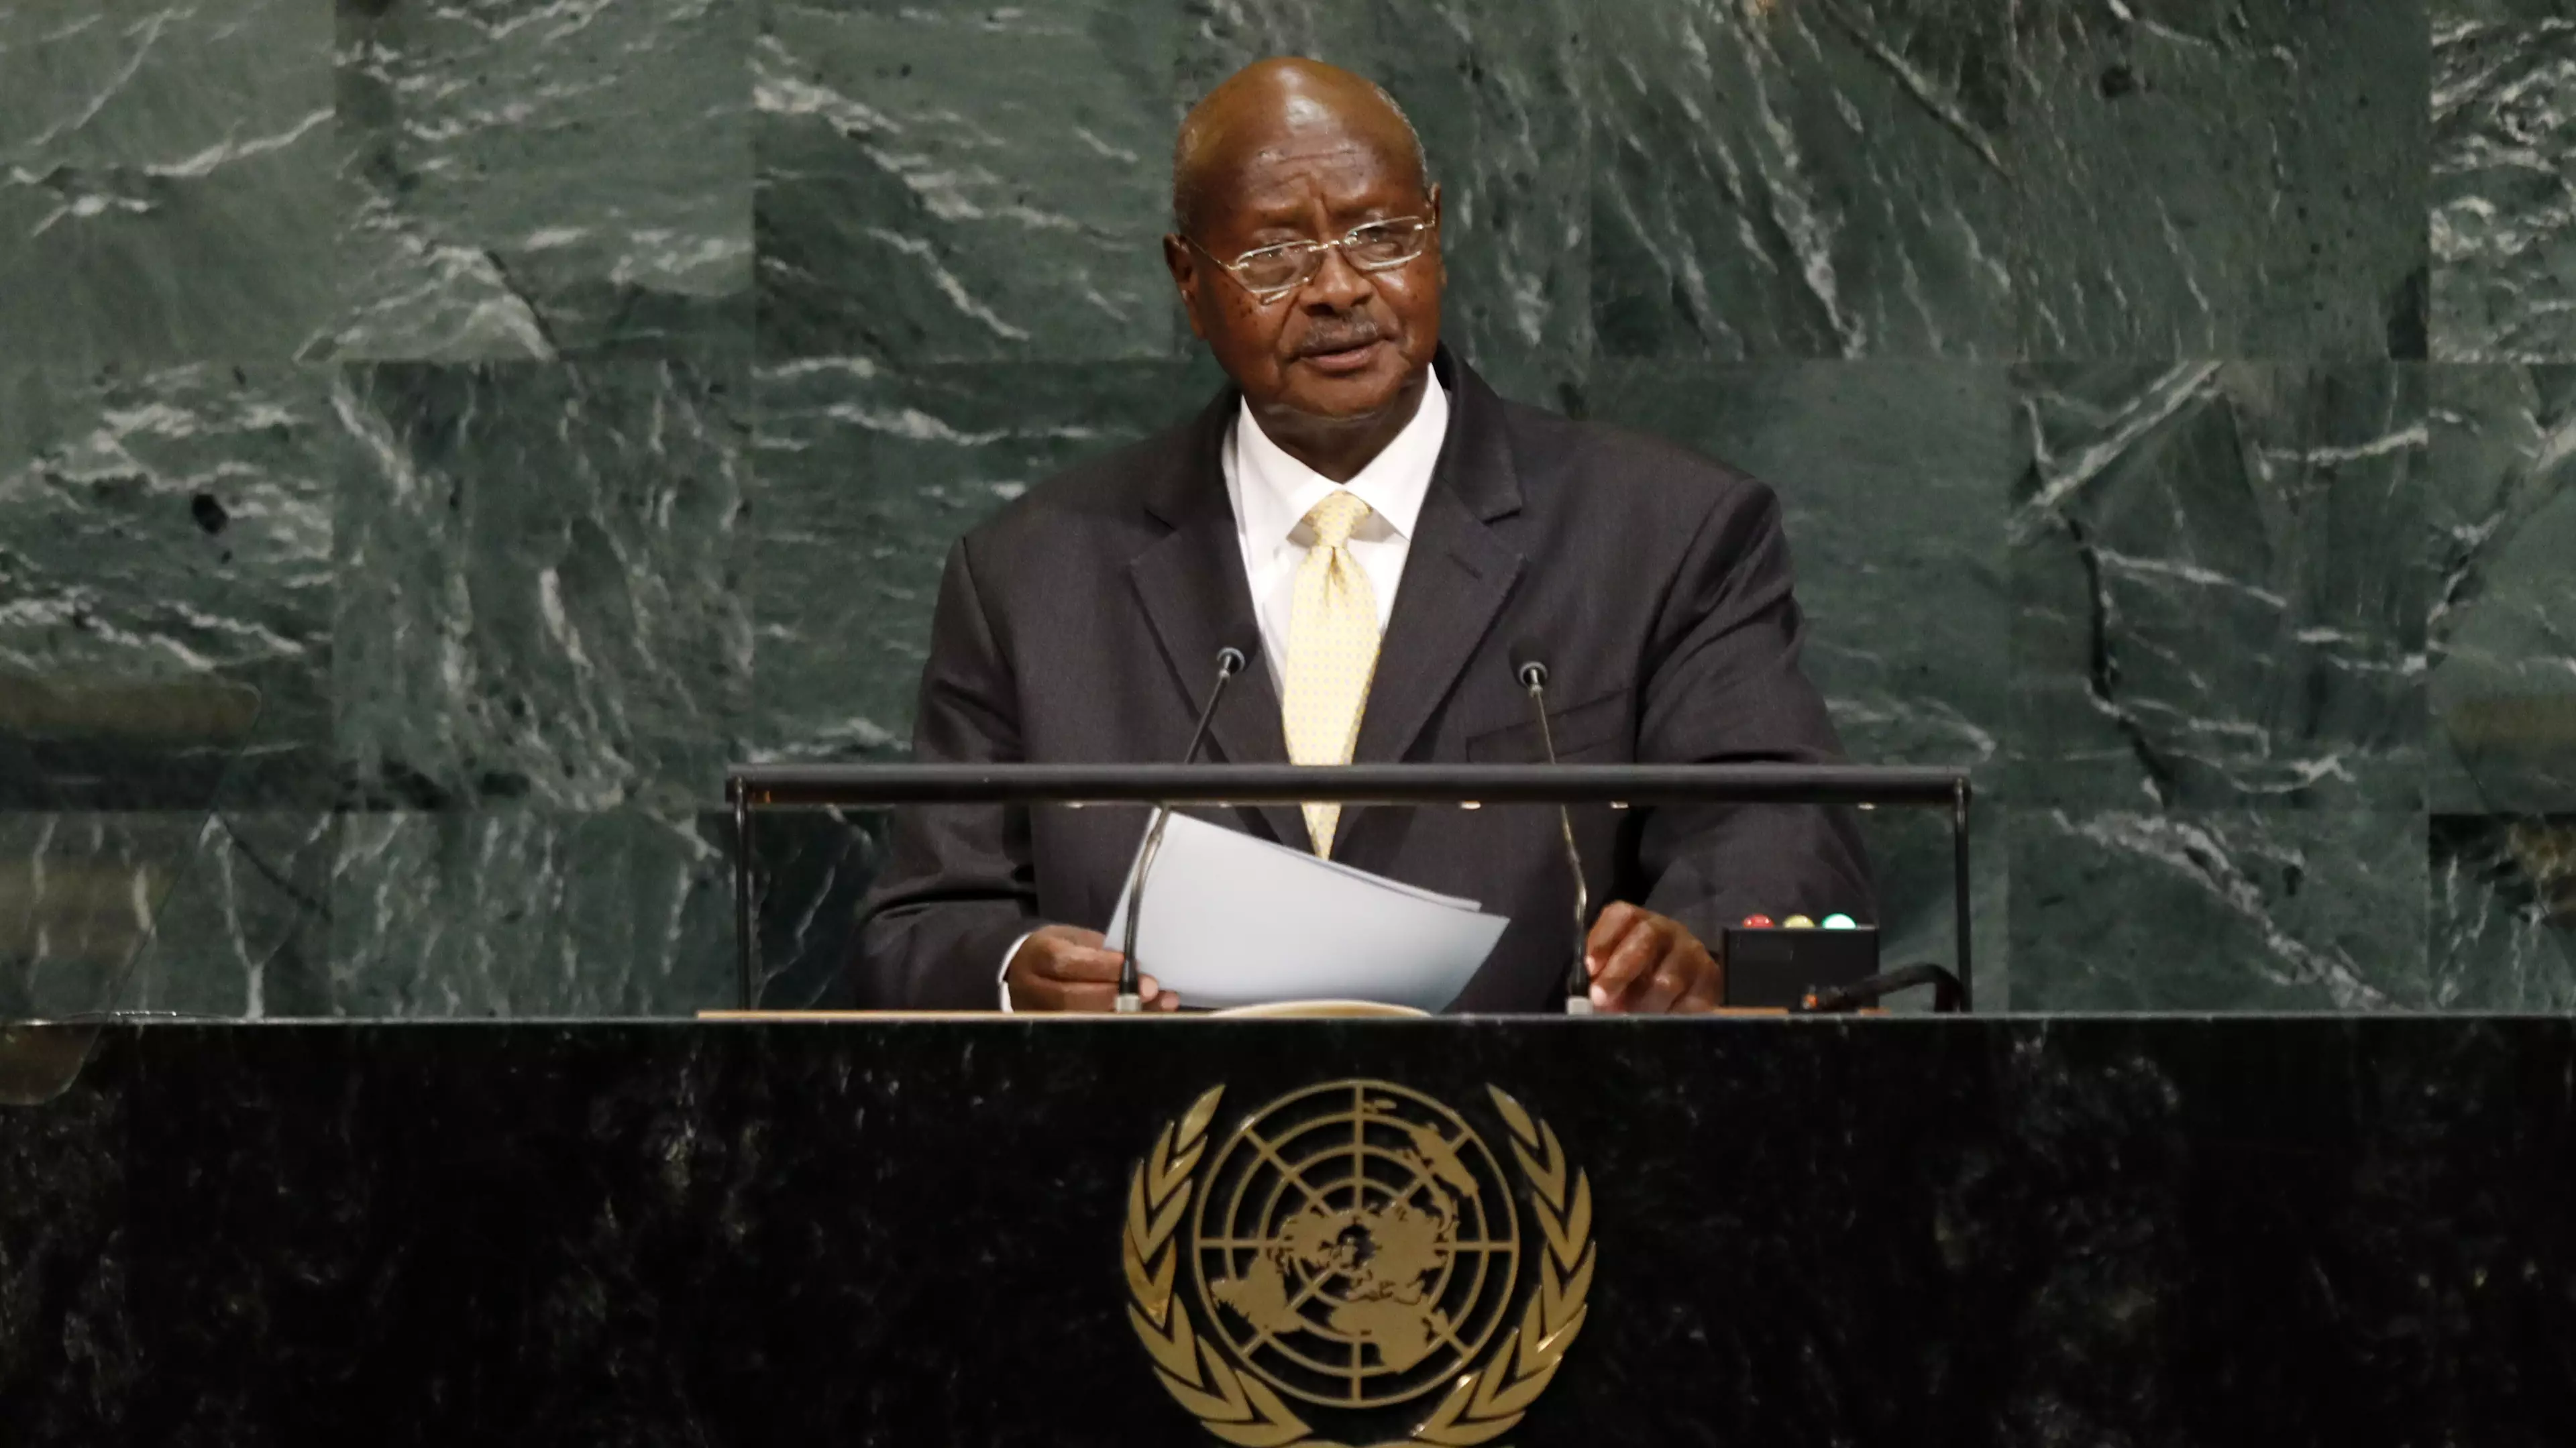 Ugandan President Warns Against Oral Sex, Saying 'The Mouth Is For Eating'